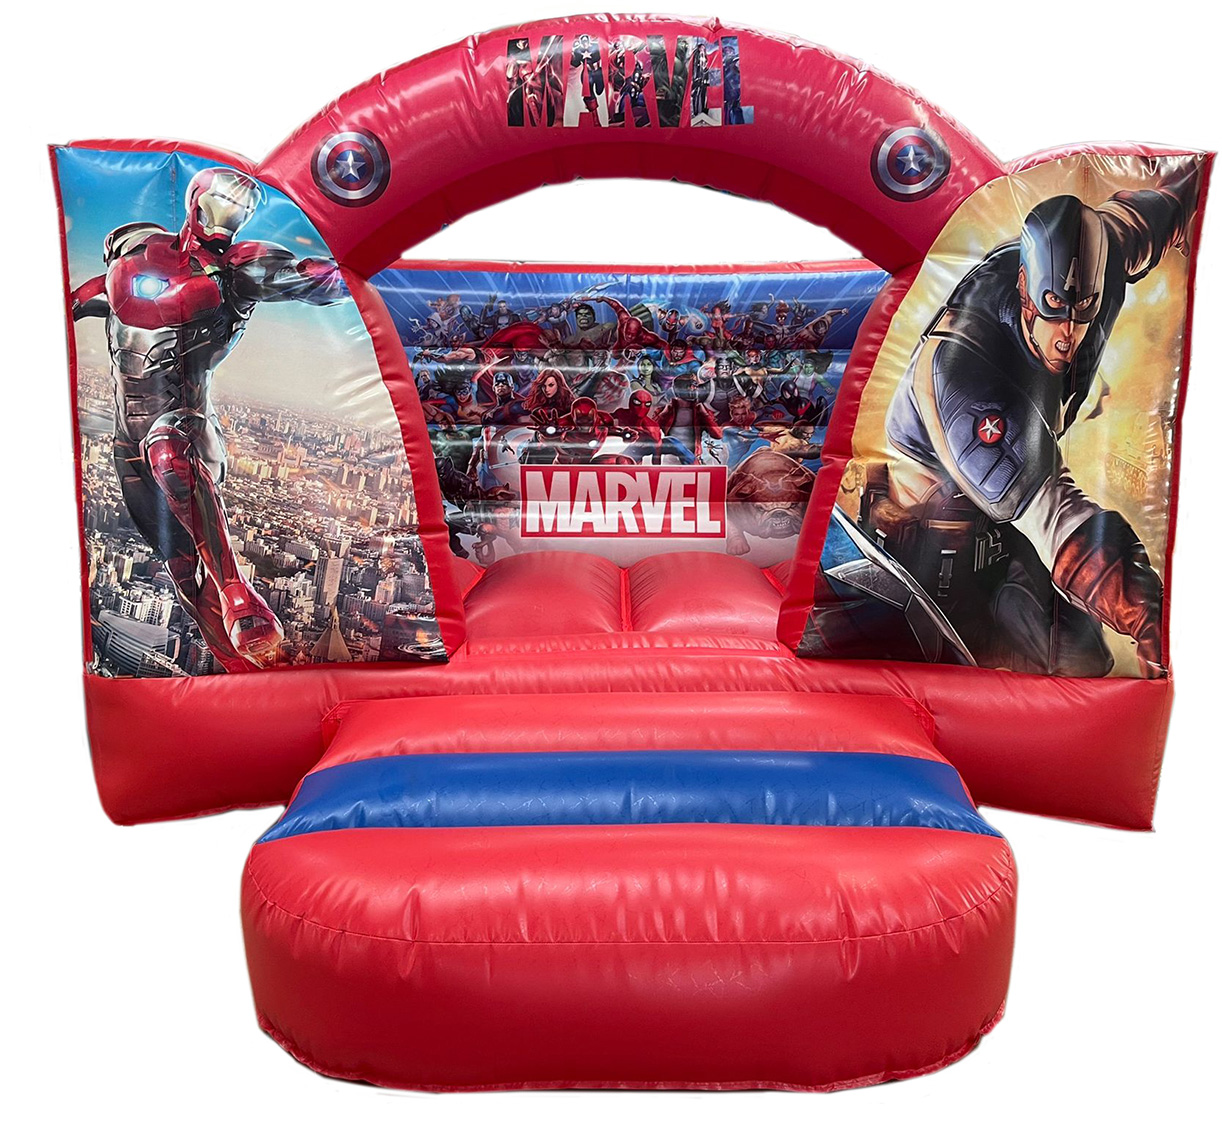 Bouncy Castle Sales - BC634 - Bouncy Inflatable for sale